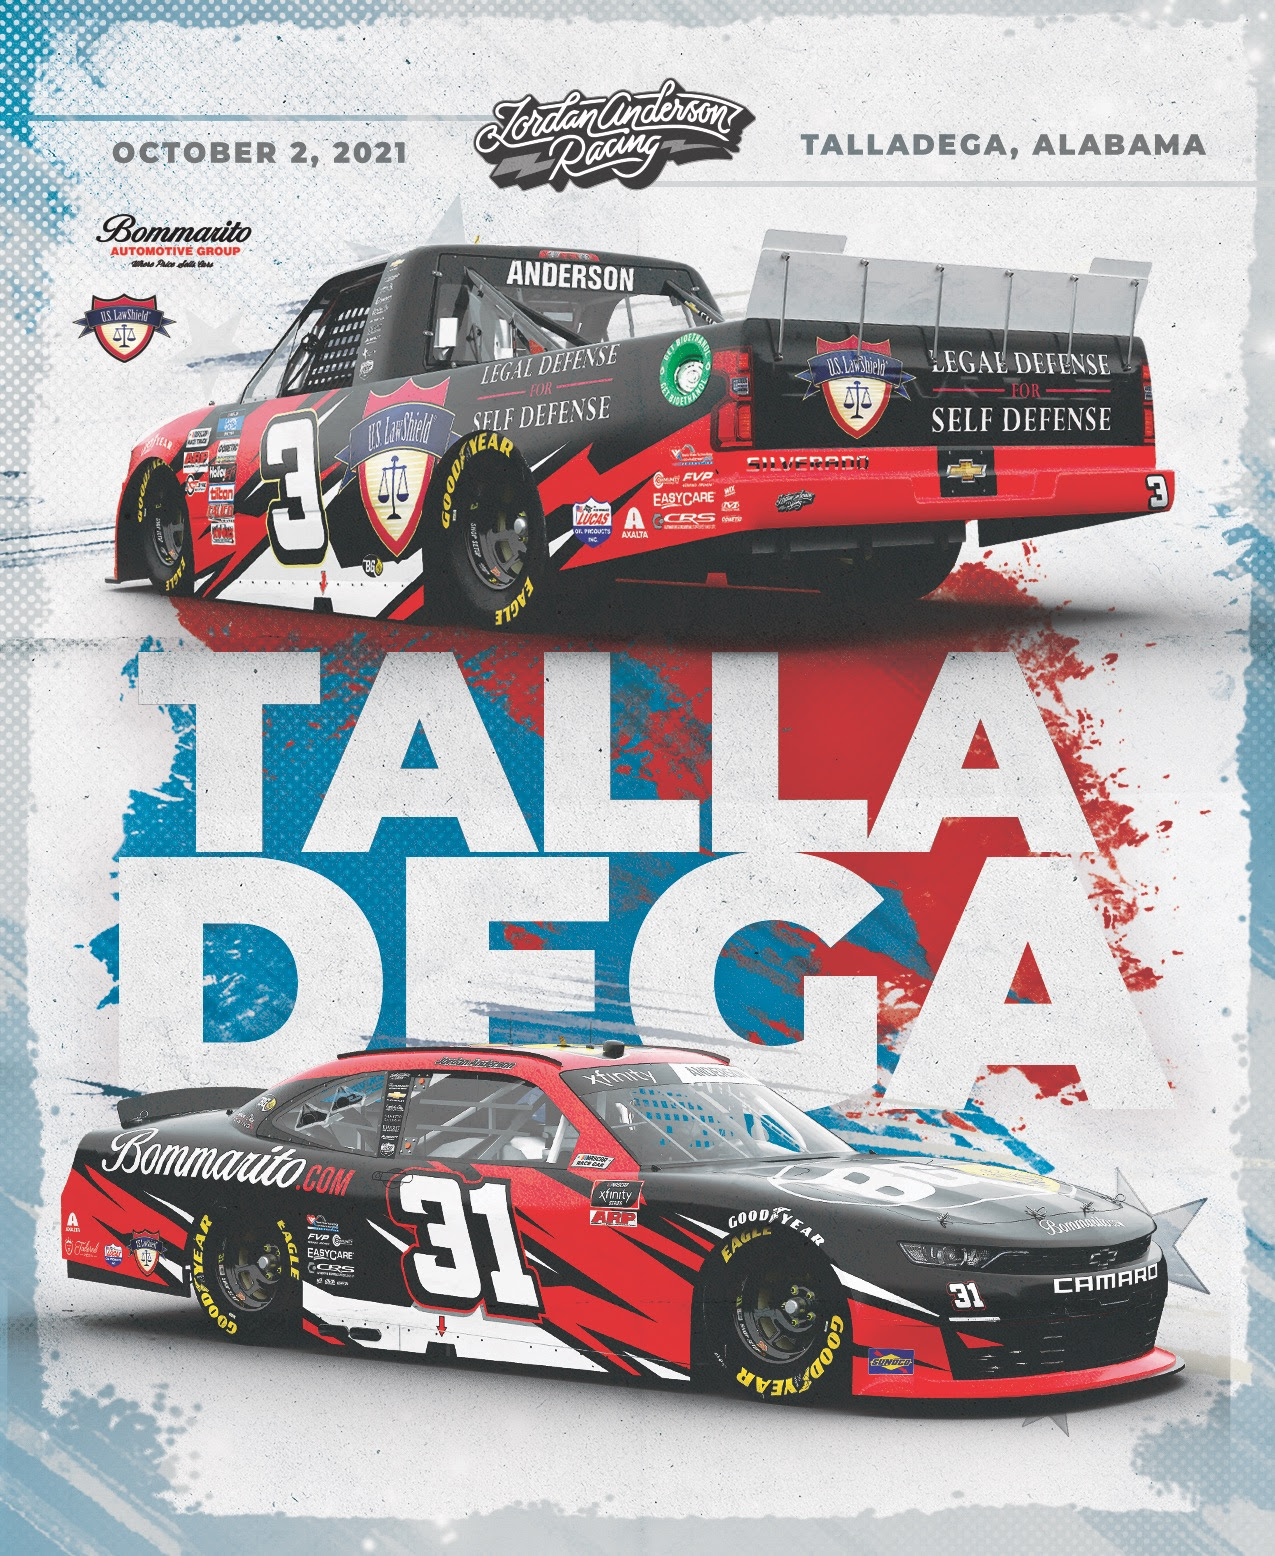 Jordan Anderson To Compete in NASCAR Double-Duty at Talladega Superspeedway Saturday